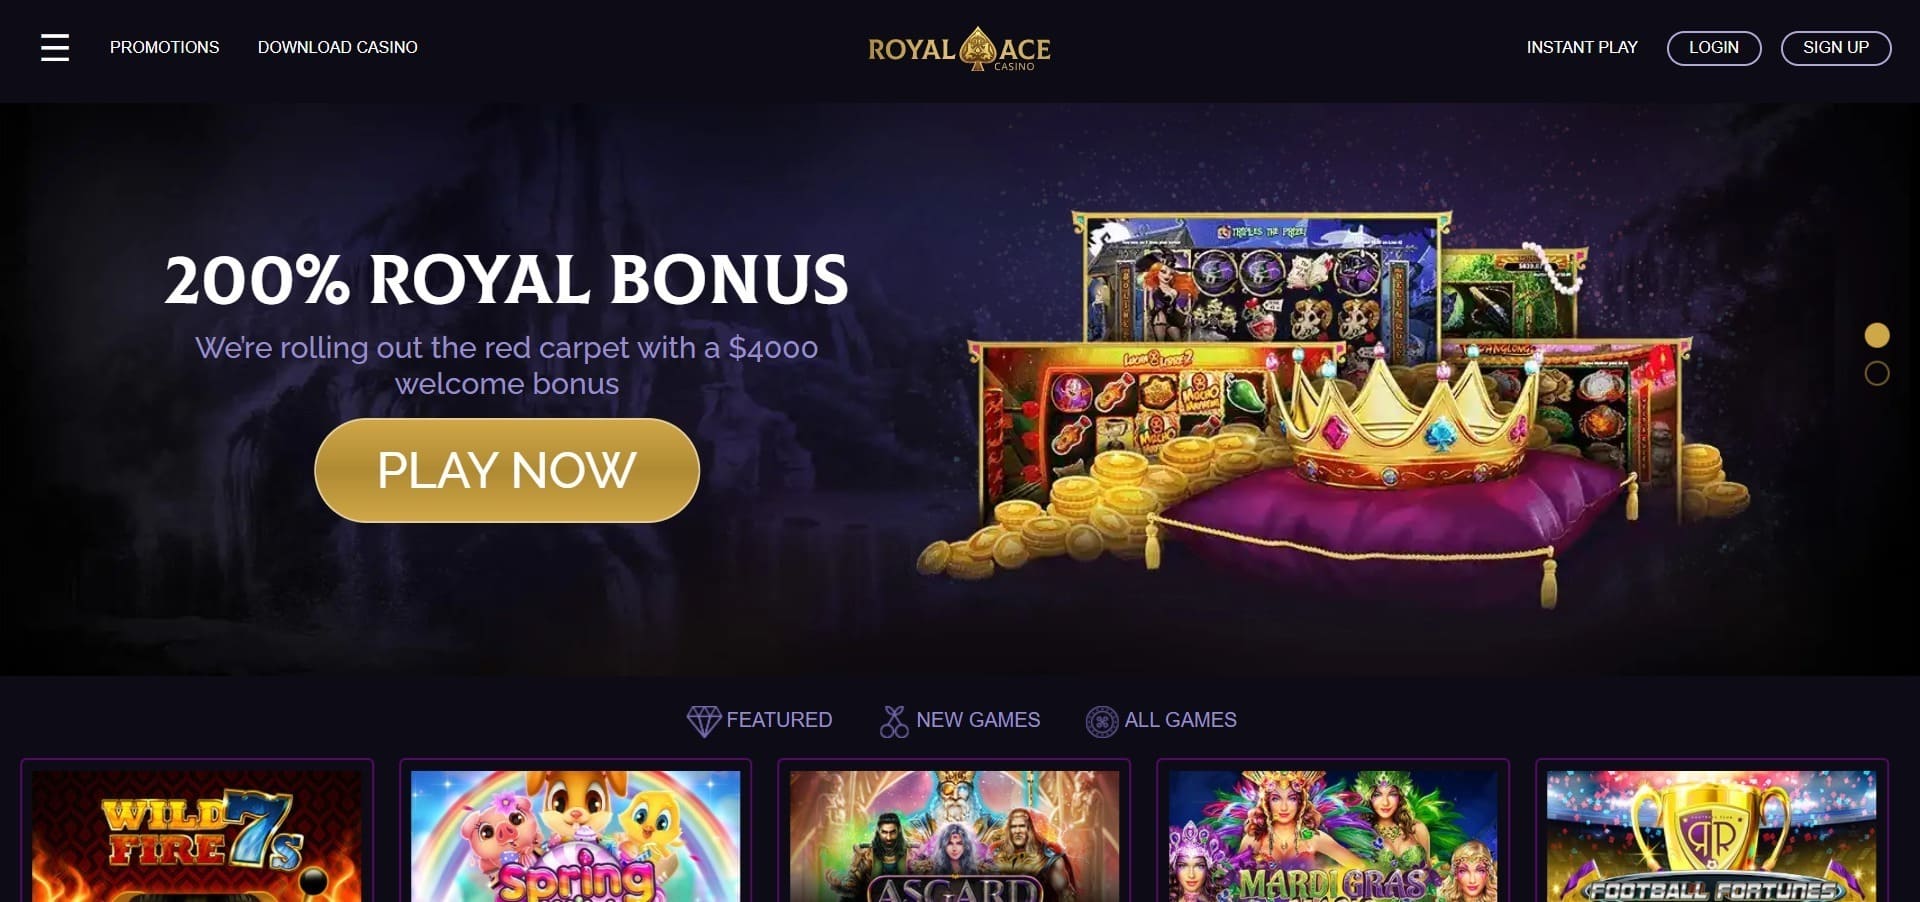 Official website of the Royal Ace Casino